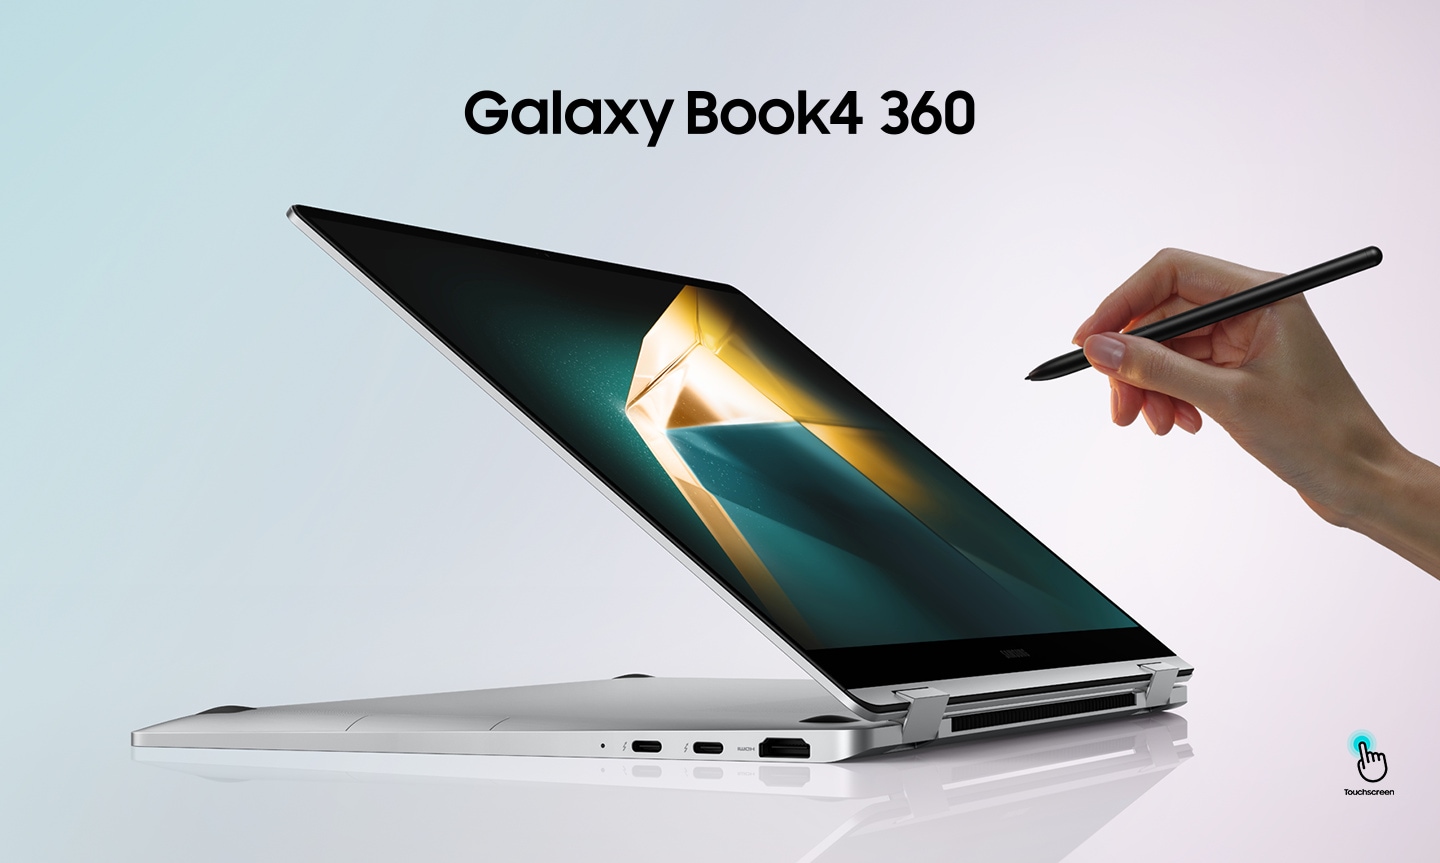 Galaxy Book4 360 in Silver is folded almost all the way back, facing right with a dark green and yellow wallpaper onscreen and a person holding S Pen pointed at the screen. Touchscreen icon is shown.